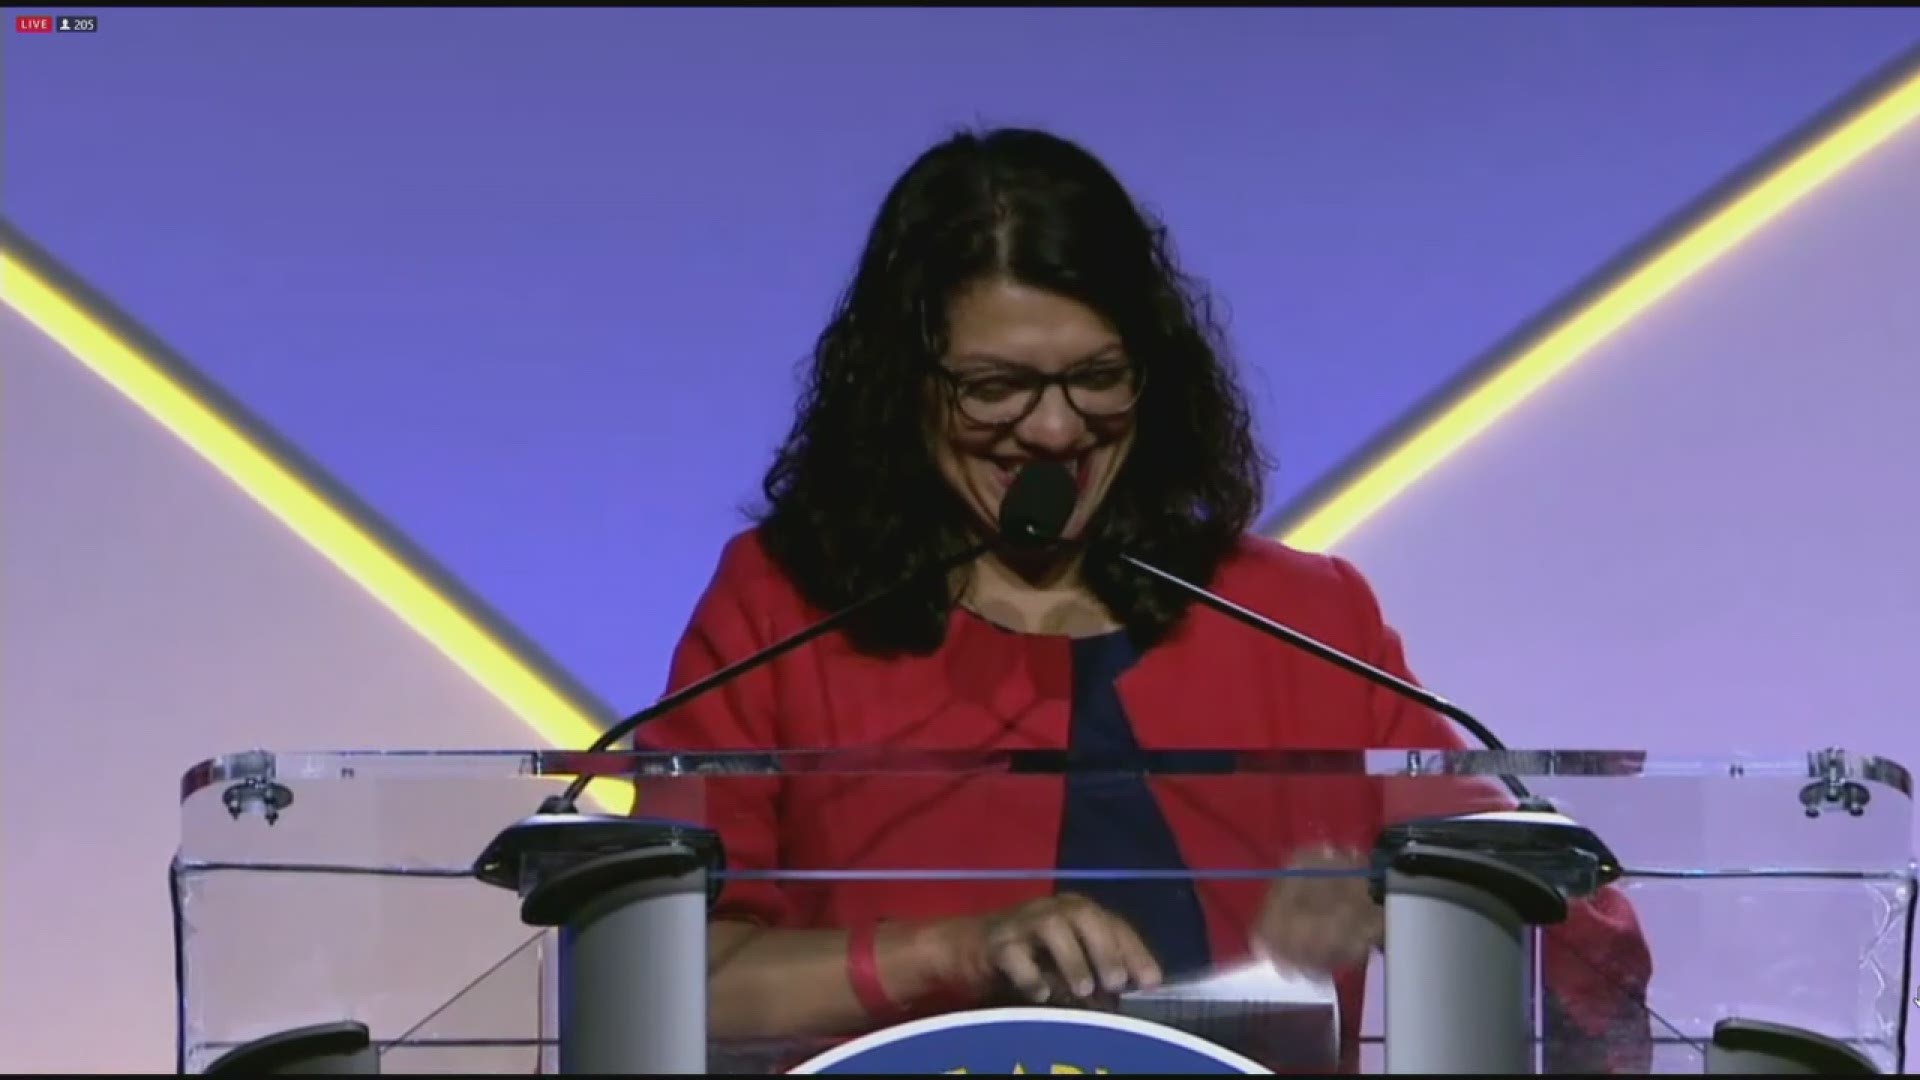 Rep. Rashida Tlaib (D-Detroit) opened her speech at the NAACP convention Monday morning, July 22, 2019 with a jab at the president.